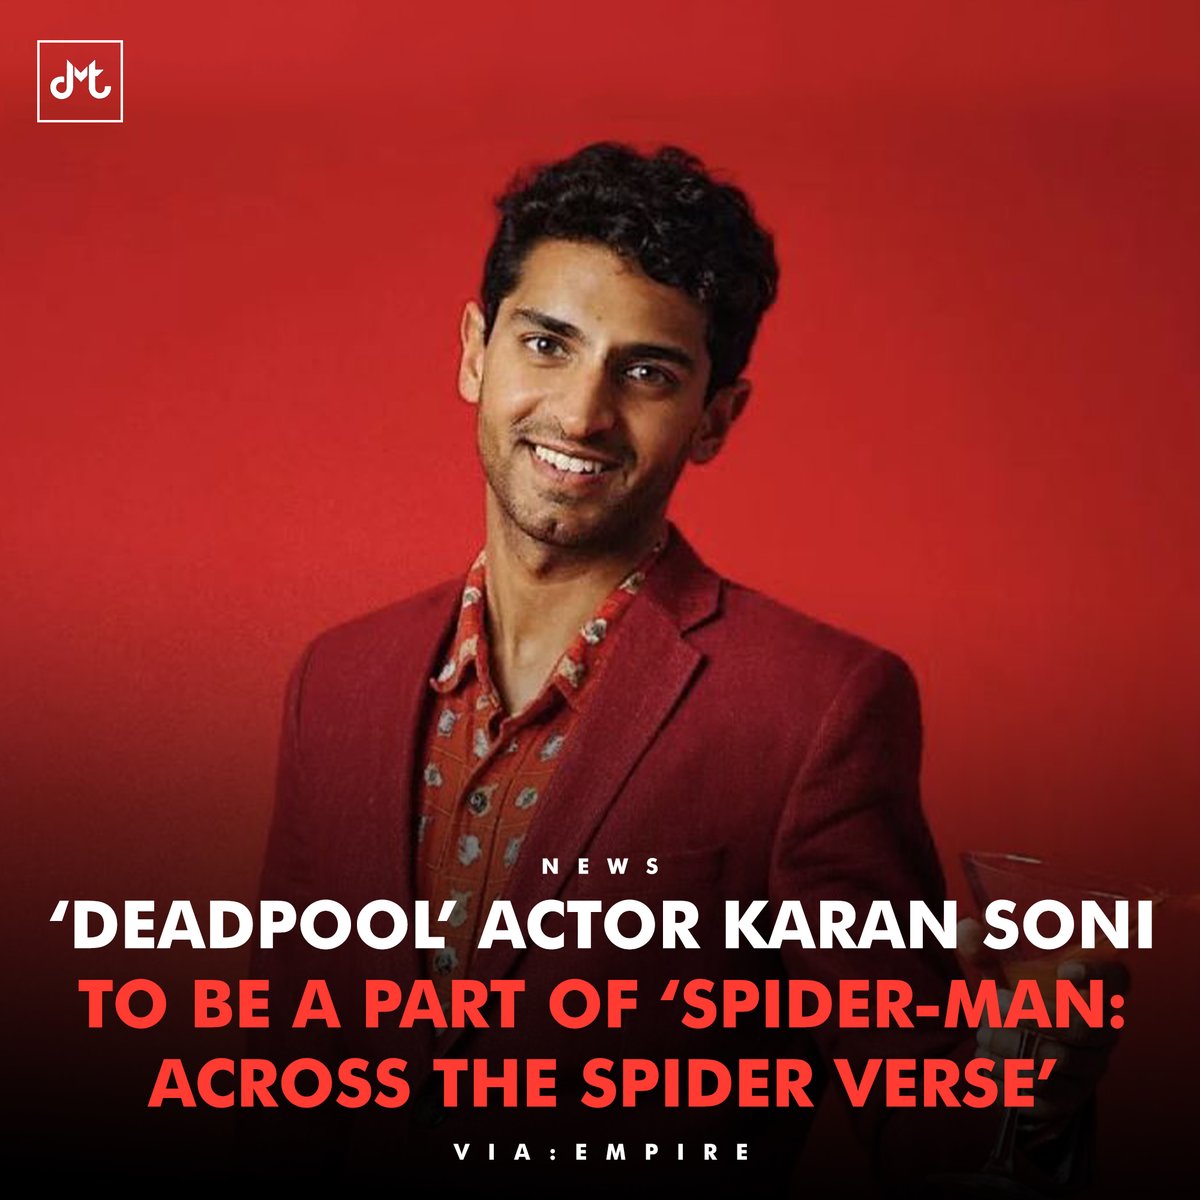 Karan Soni is making his way into the bigger franchises now. What are your thoughts about this?
.
.
#KaranSoni #SpiderManAcrosstheSpiderVerse #MarvelStudios